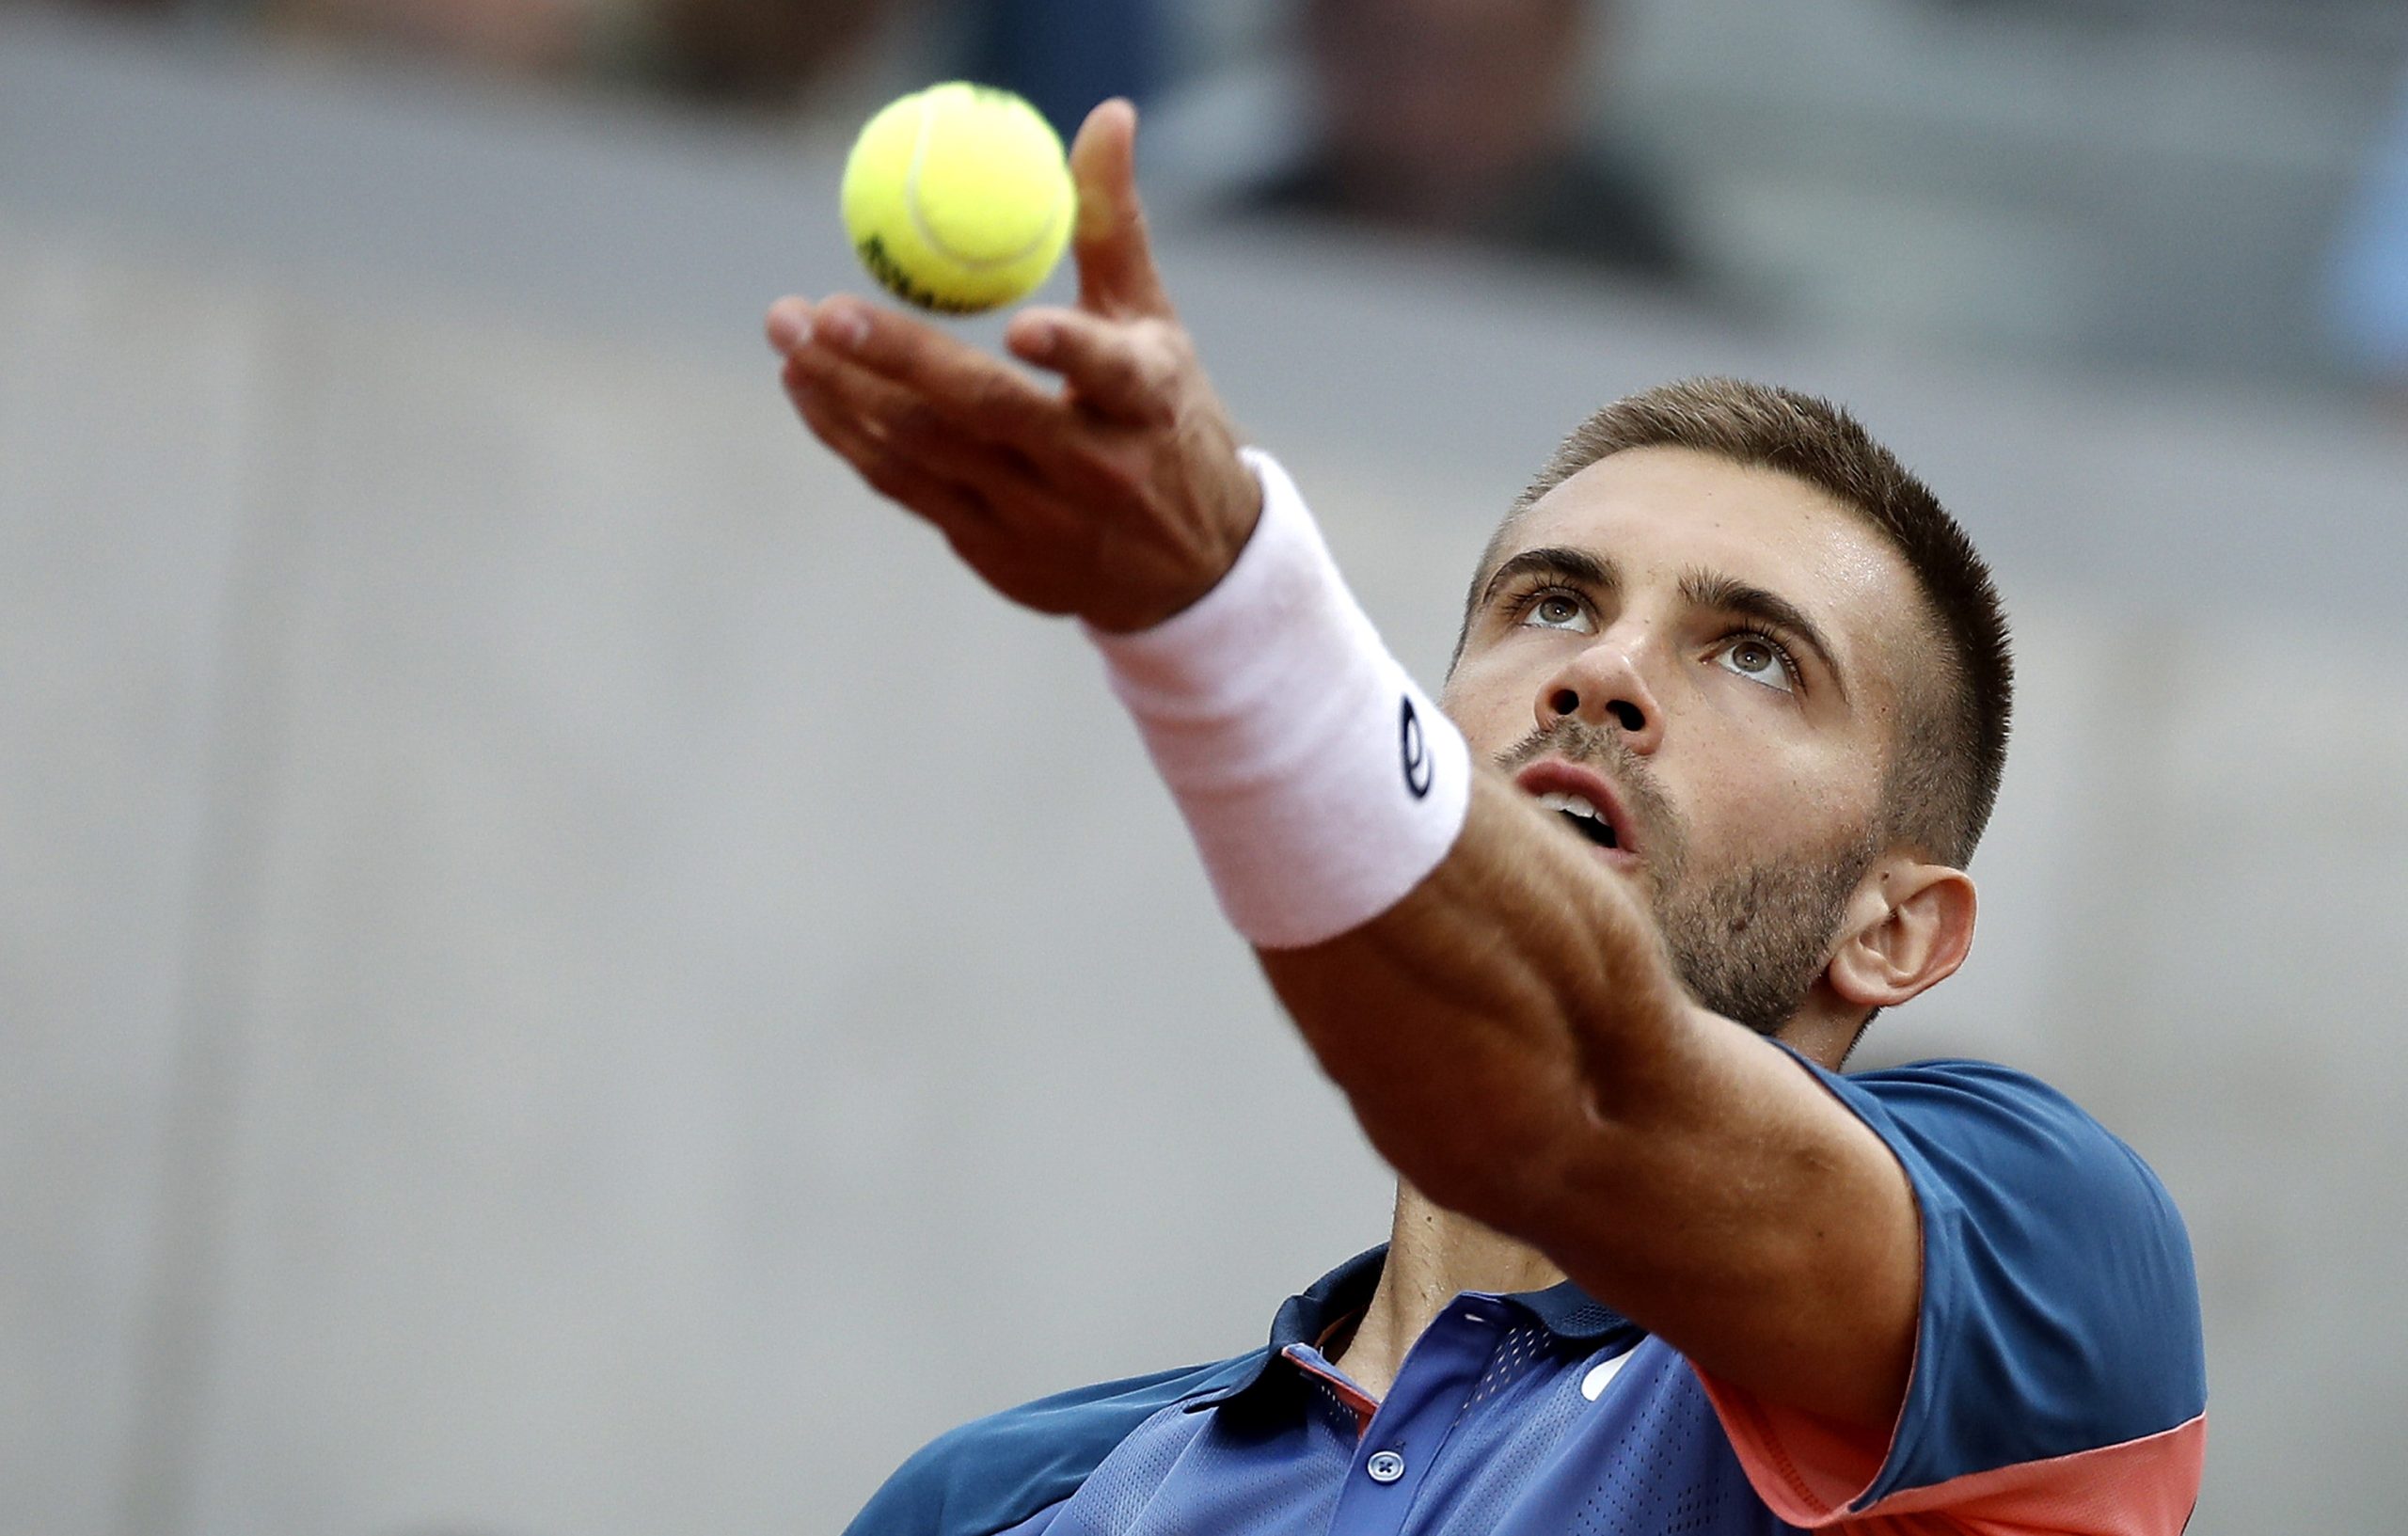 epa09975240 Borna Coric of Croatia serves in the men's second round match against Grigor Dimitrov of Bulgaria during the French Open tennis tournament at Roland Garros in Paris, France, 25 May 2022.  EPA/CHRISTOPHE PETIT TESSON